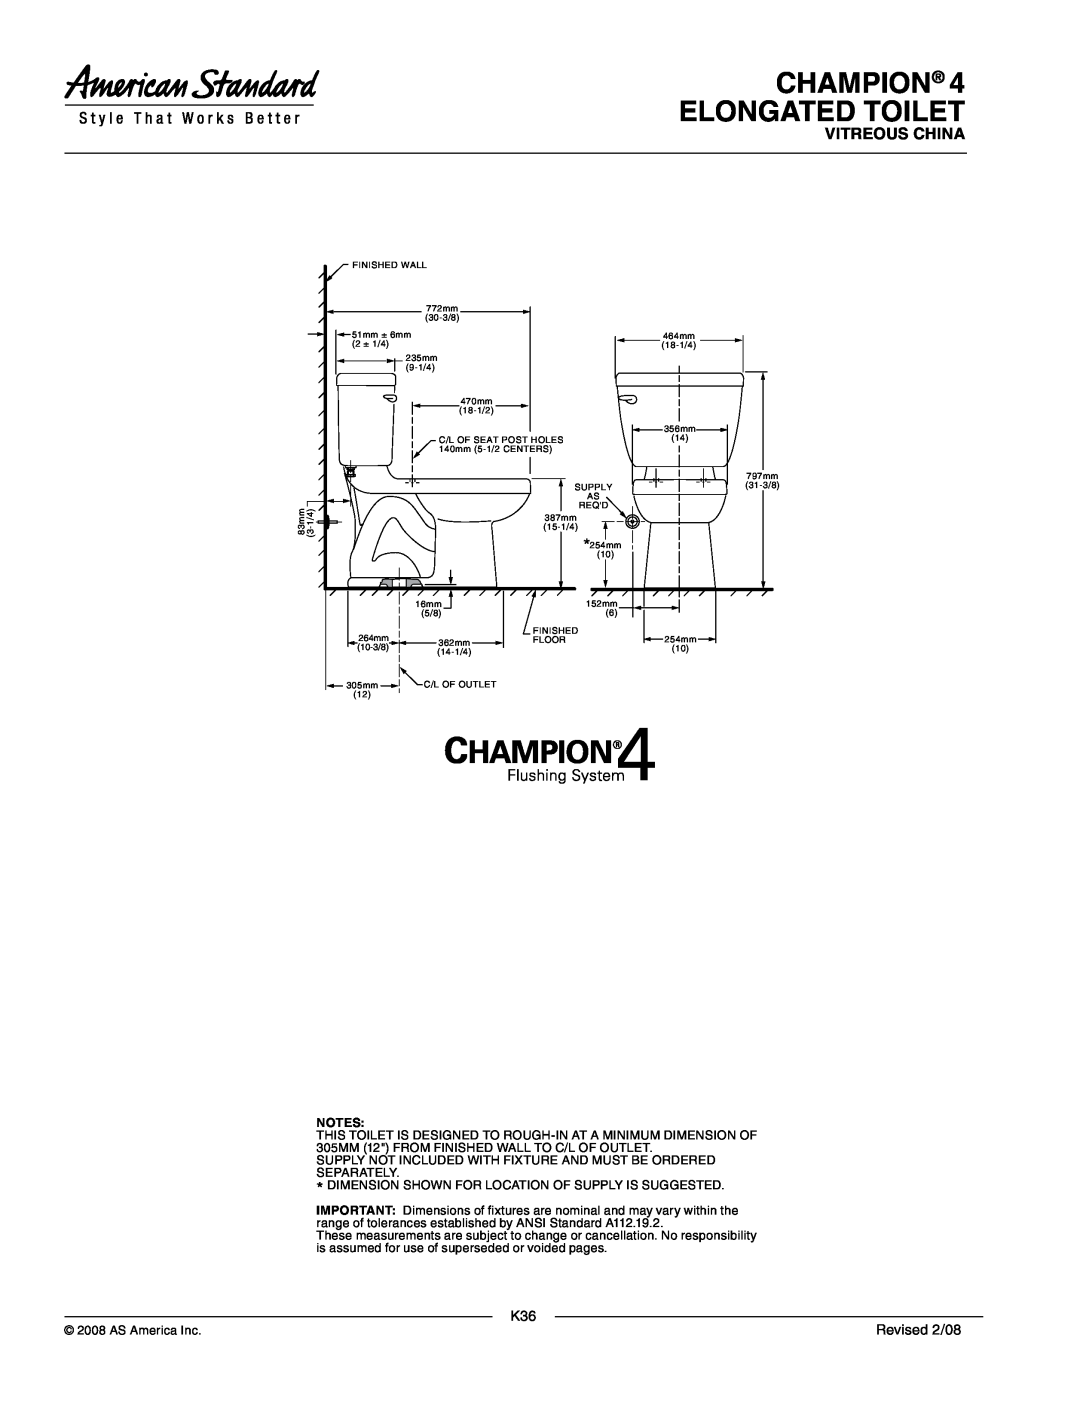 American Standard 4266.504, 2018.214, 4266.014 dimensions Champion Elongated Toilet, Vitreous China, Revised 2/08 